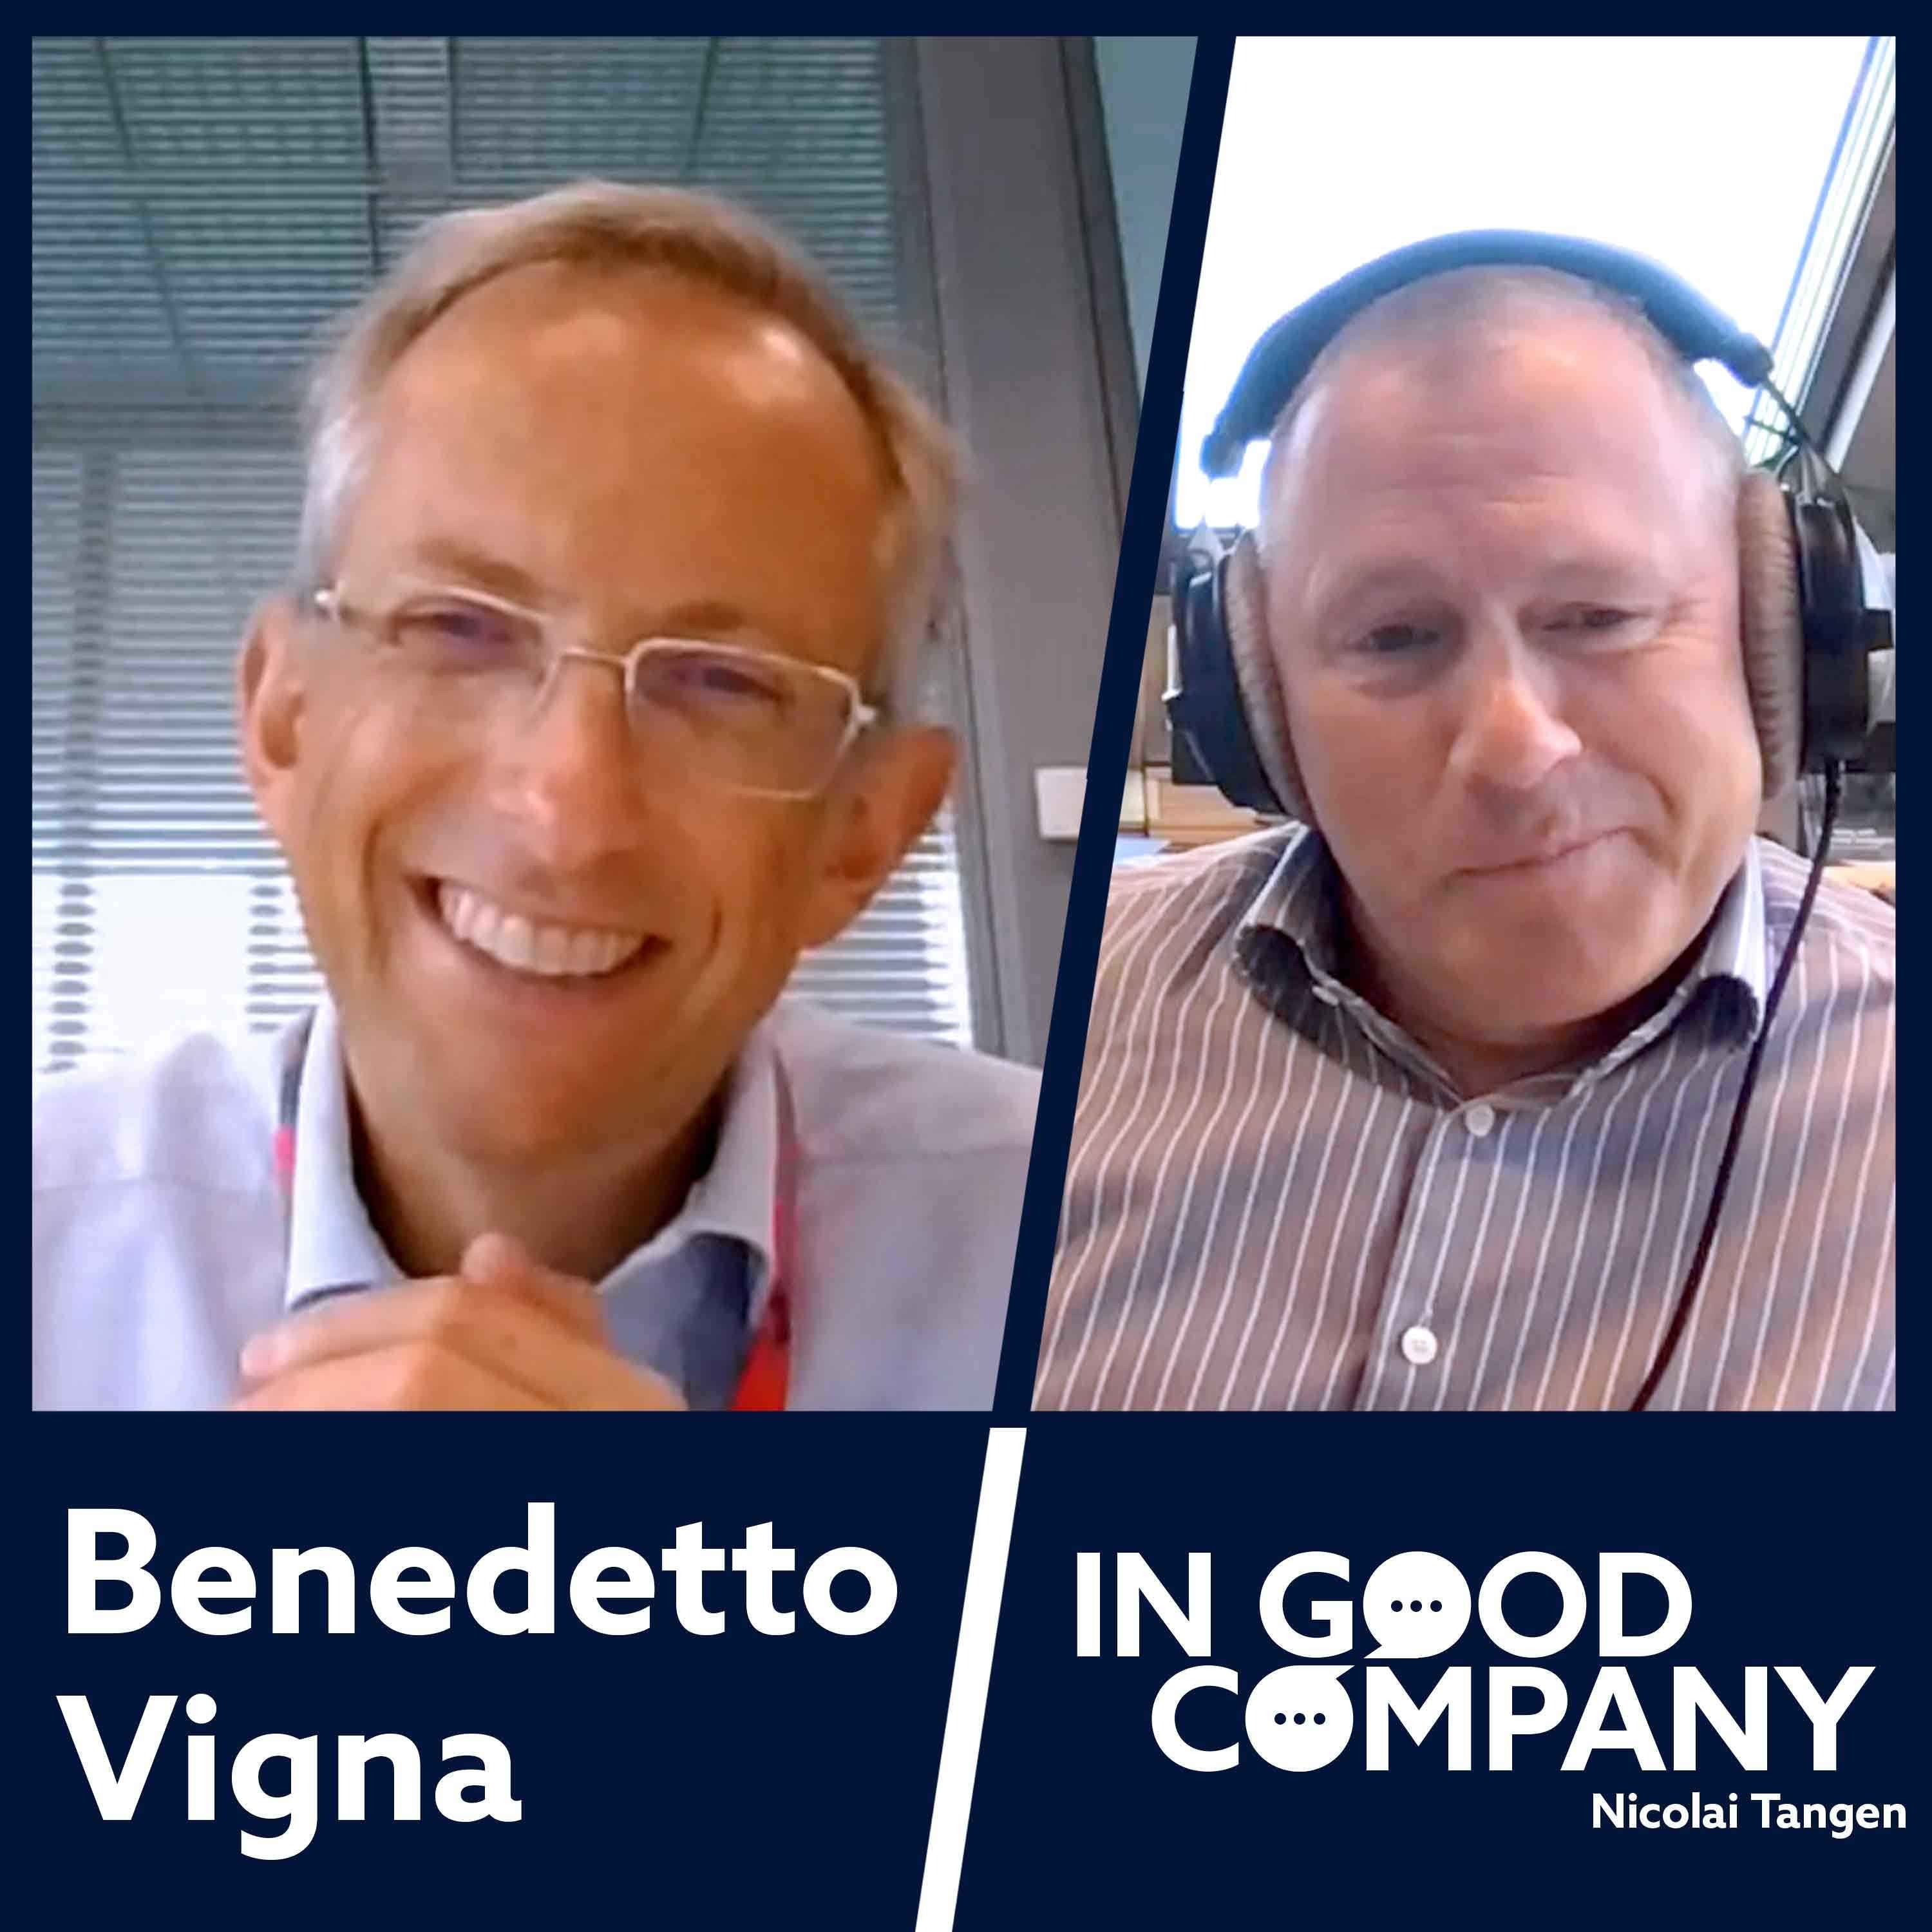 Benedetto Vigna CEO of Ferrari by Norges Bank Investment Management